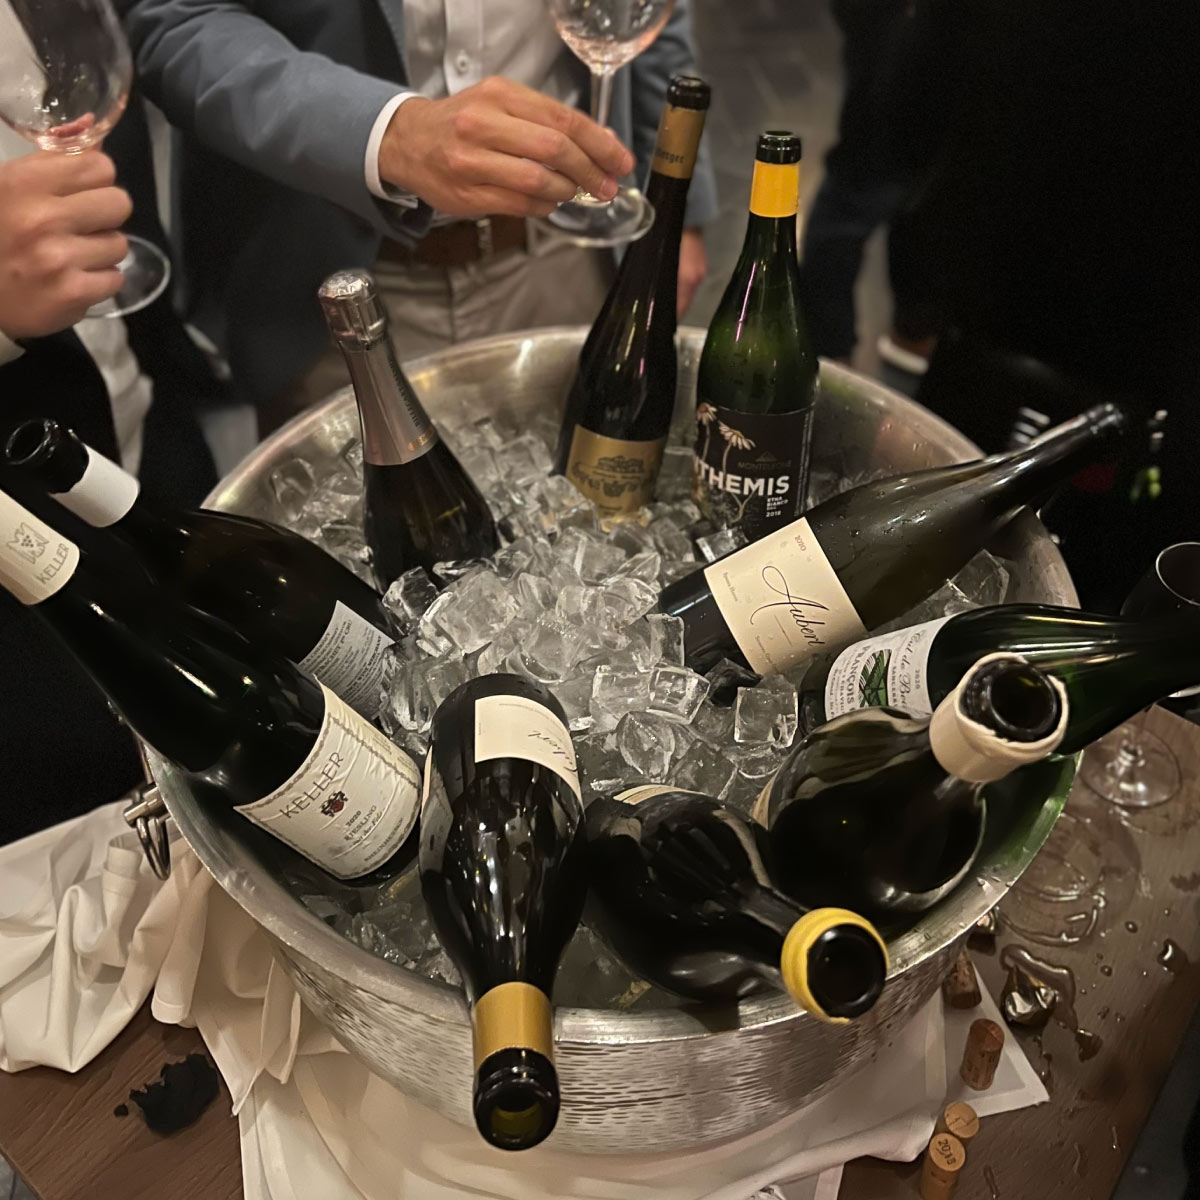 Bottles of Fine and Rare wine in an Ice bucket. Formally dressed people gathered around